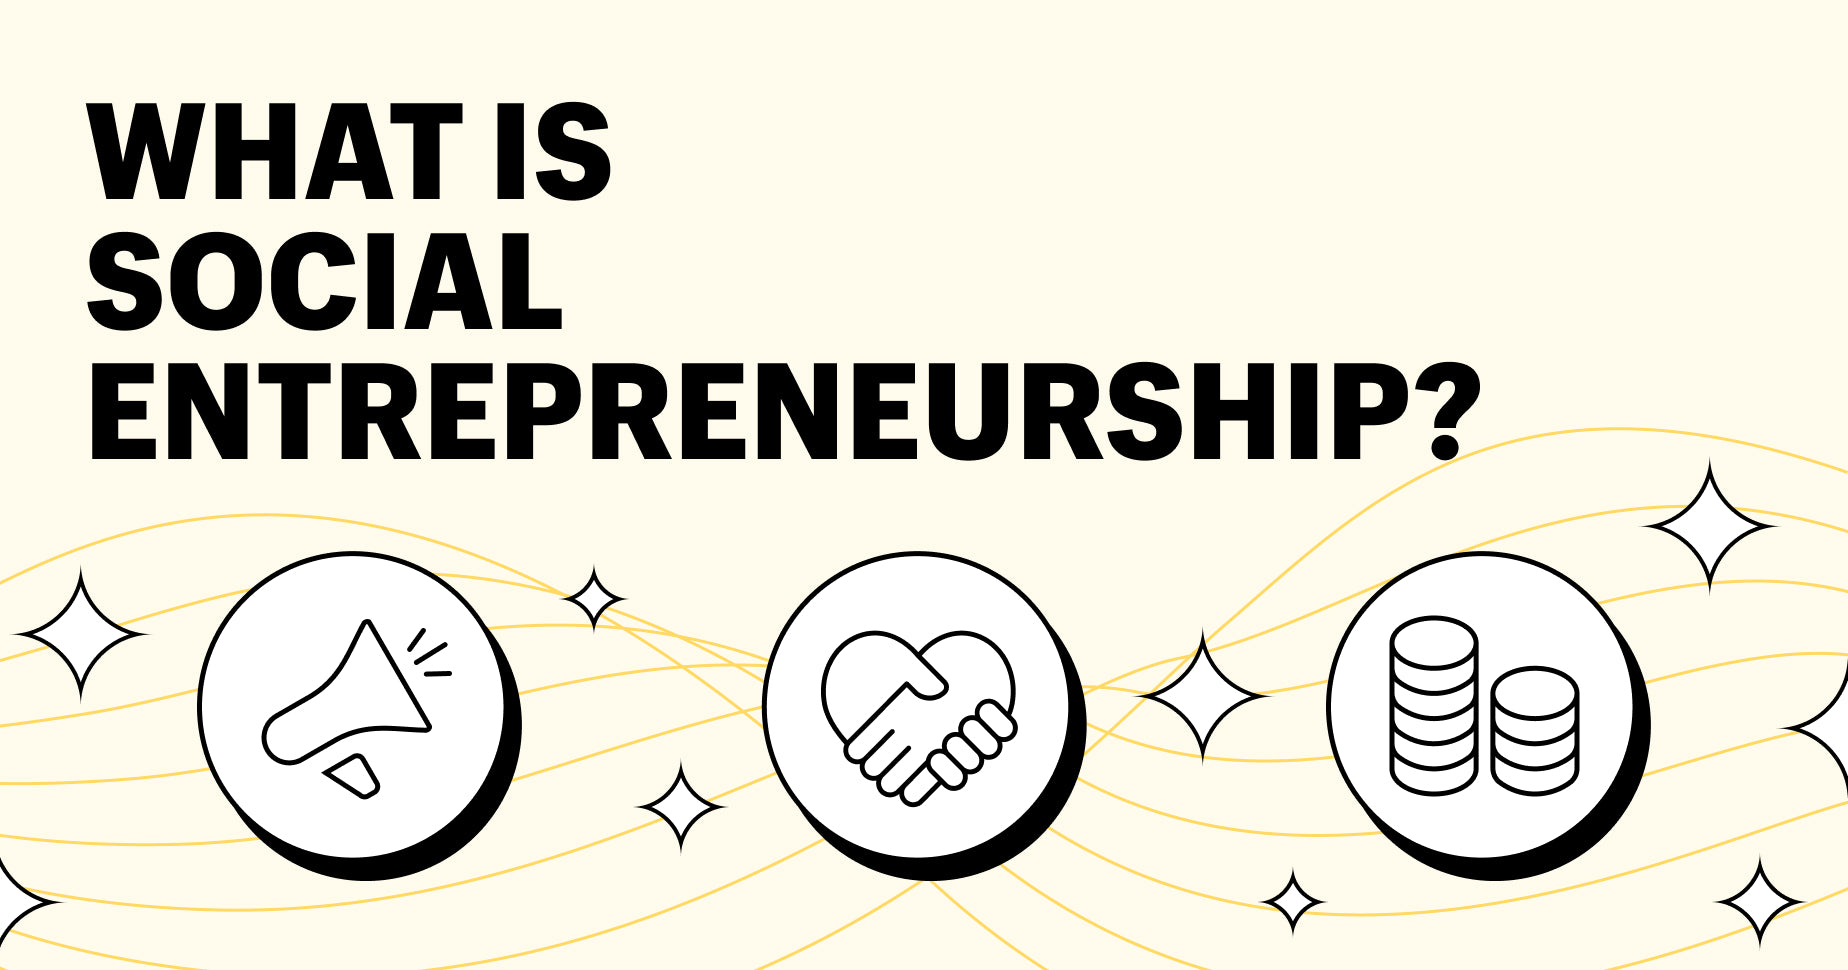 A graphic that says "what is social entrepreneurship?" at the top left. Underneath is three icons that represent the values of social company; a mission or calling, hands holding in the shape of a heart, and a stack of coins.